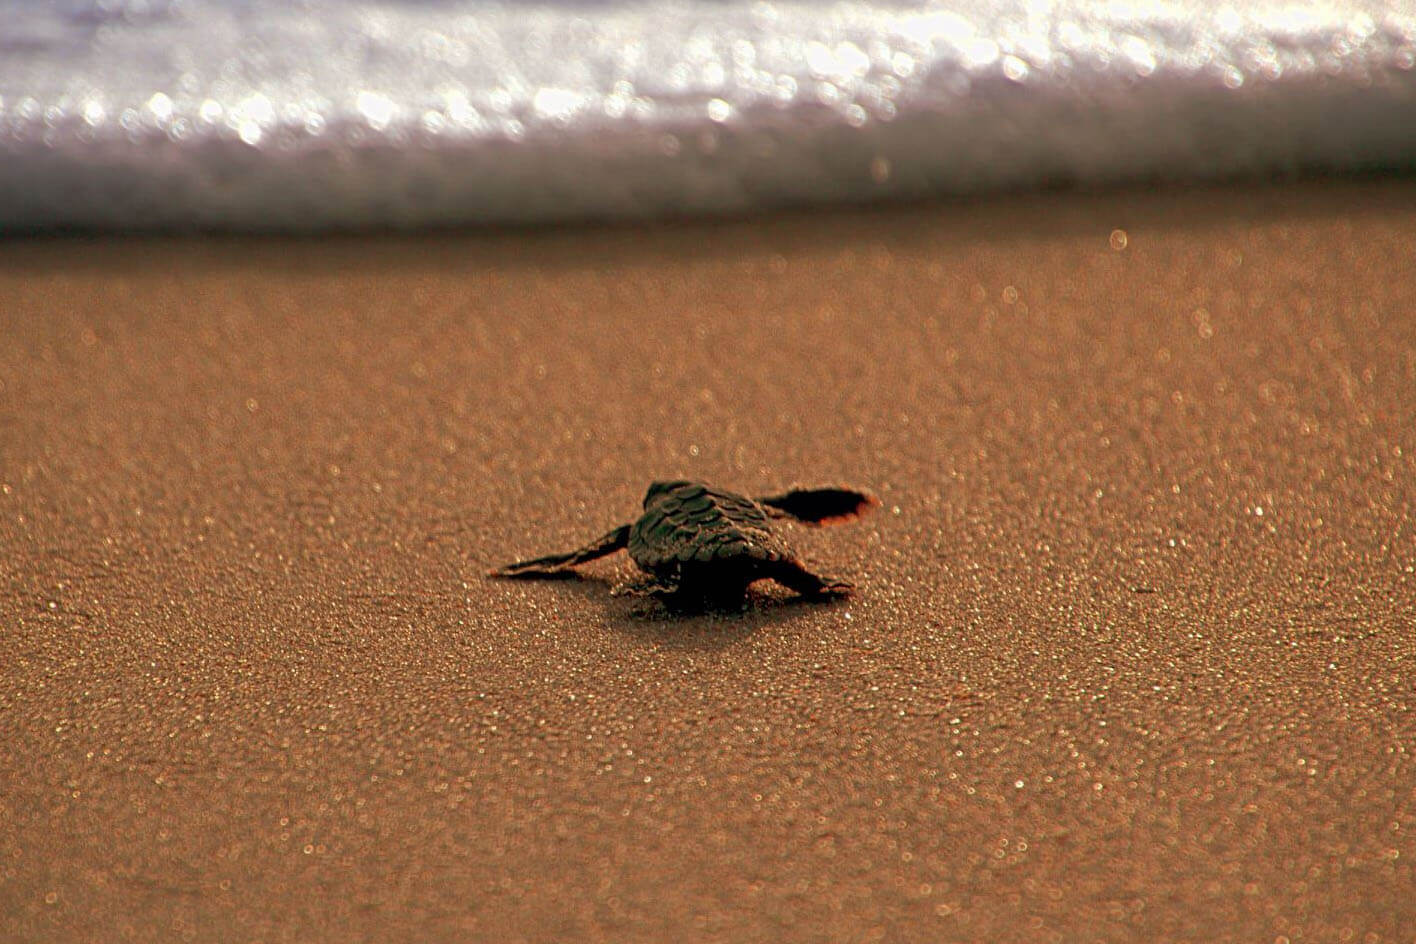 Baby Sea Turtle from Sea Turtle Preservation Society